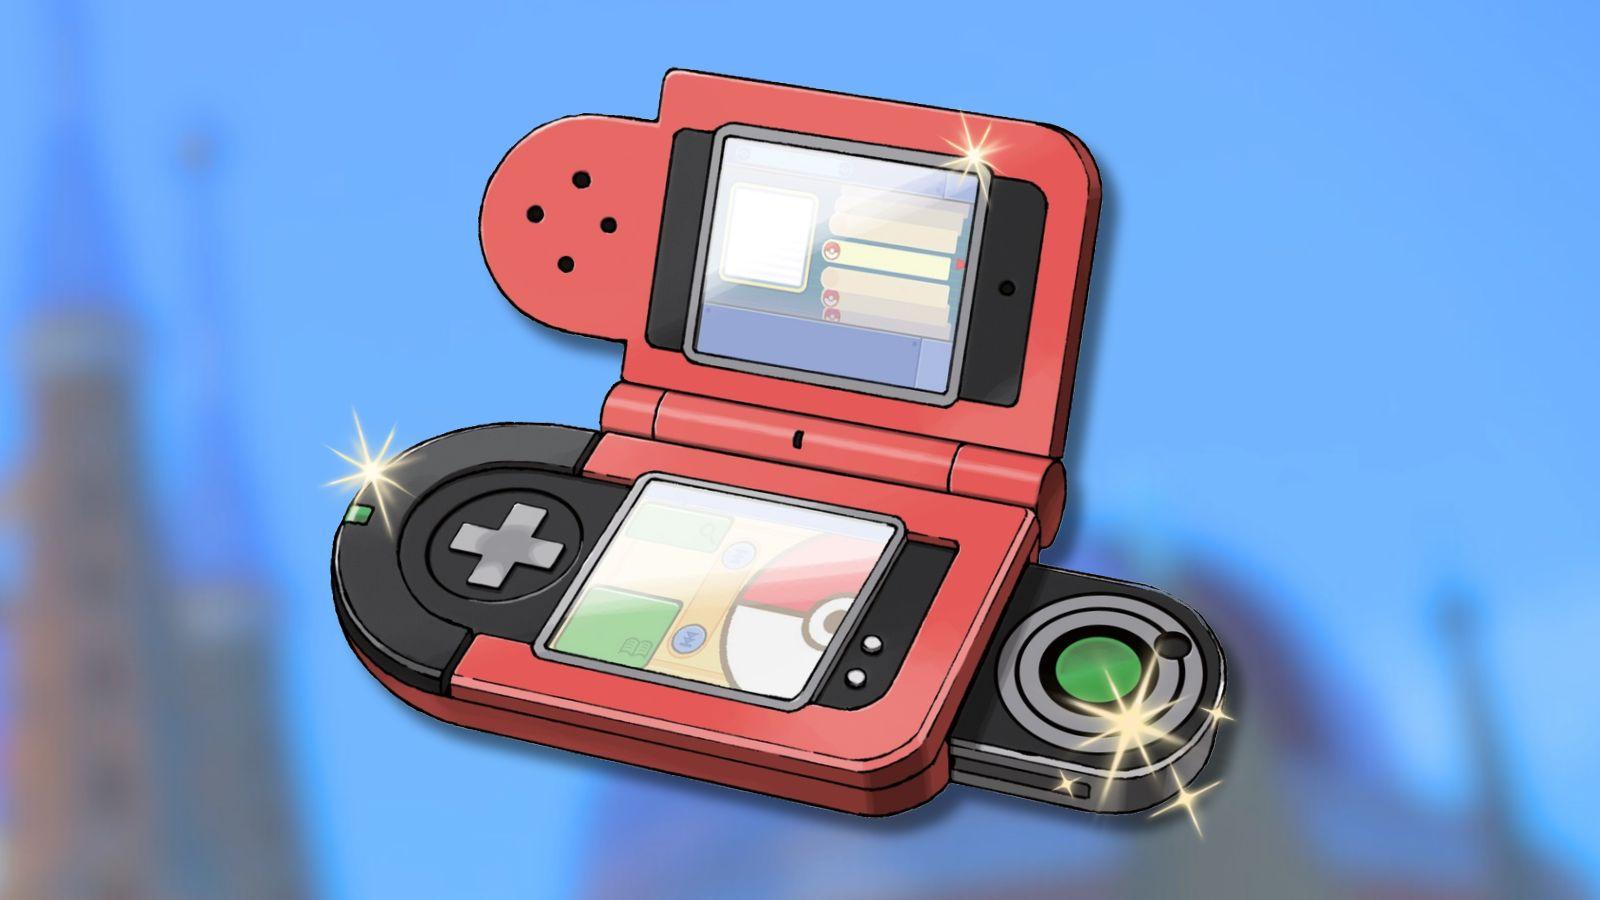 Sinnoh Pokedex with sparkles and video game background.